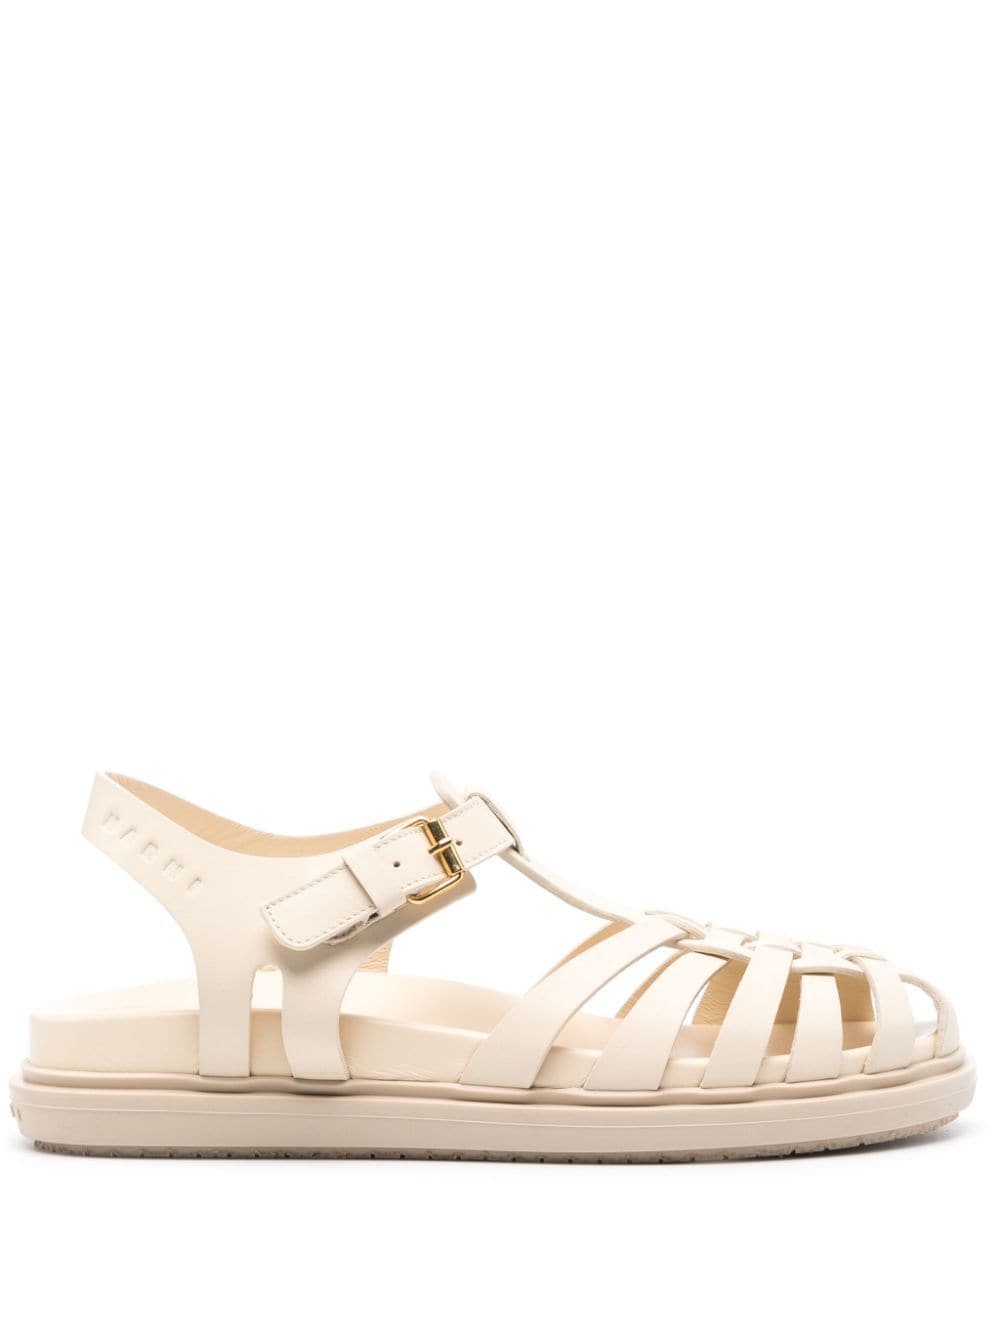 Marni Caged Leather Sandals In Neutrals